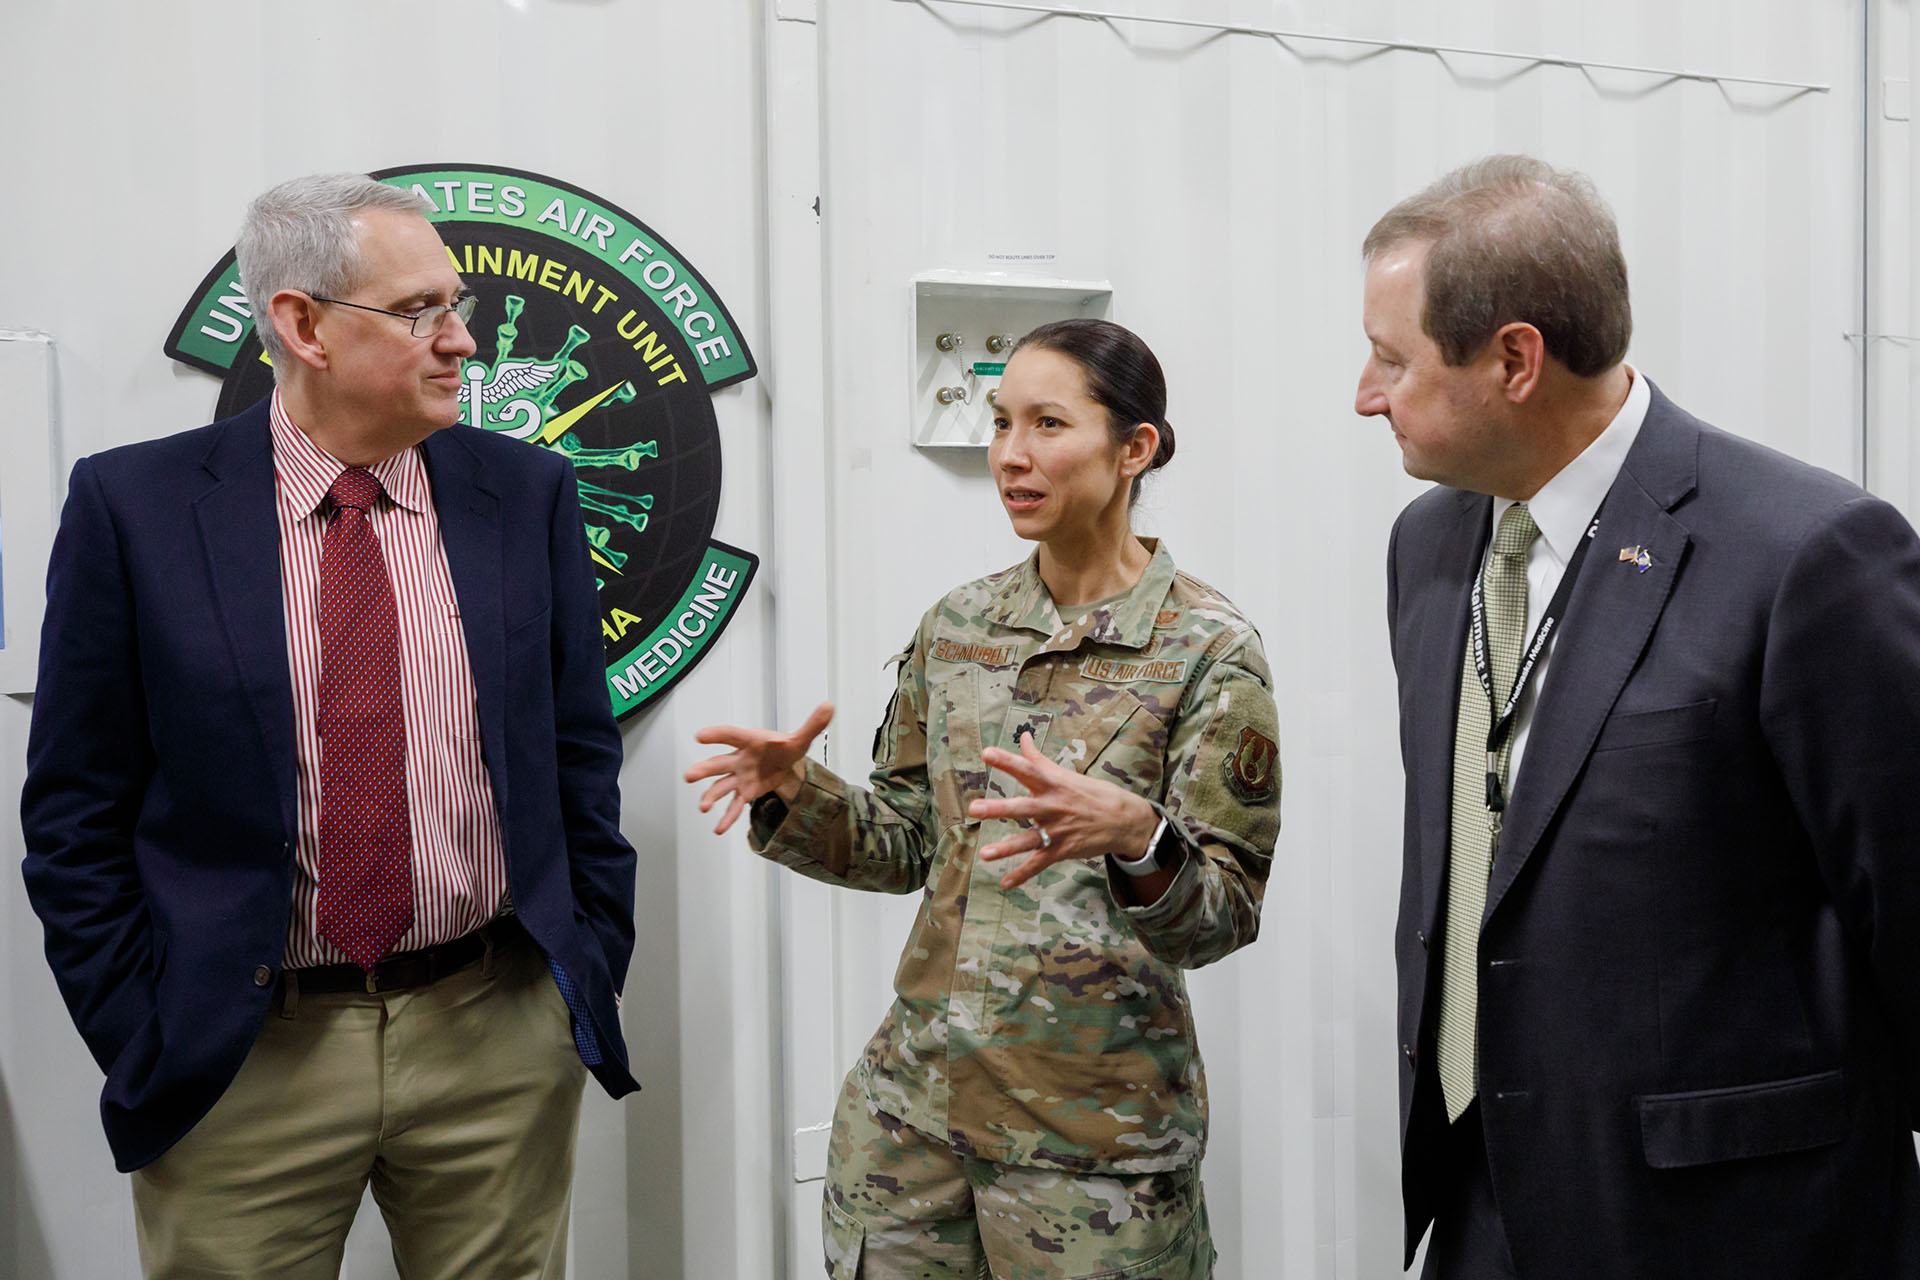 UNMC welcomes Defense Health Agency for health security tour